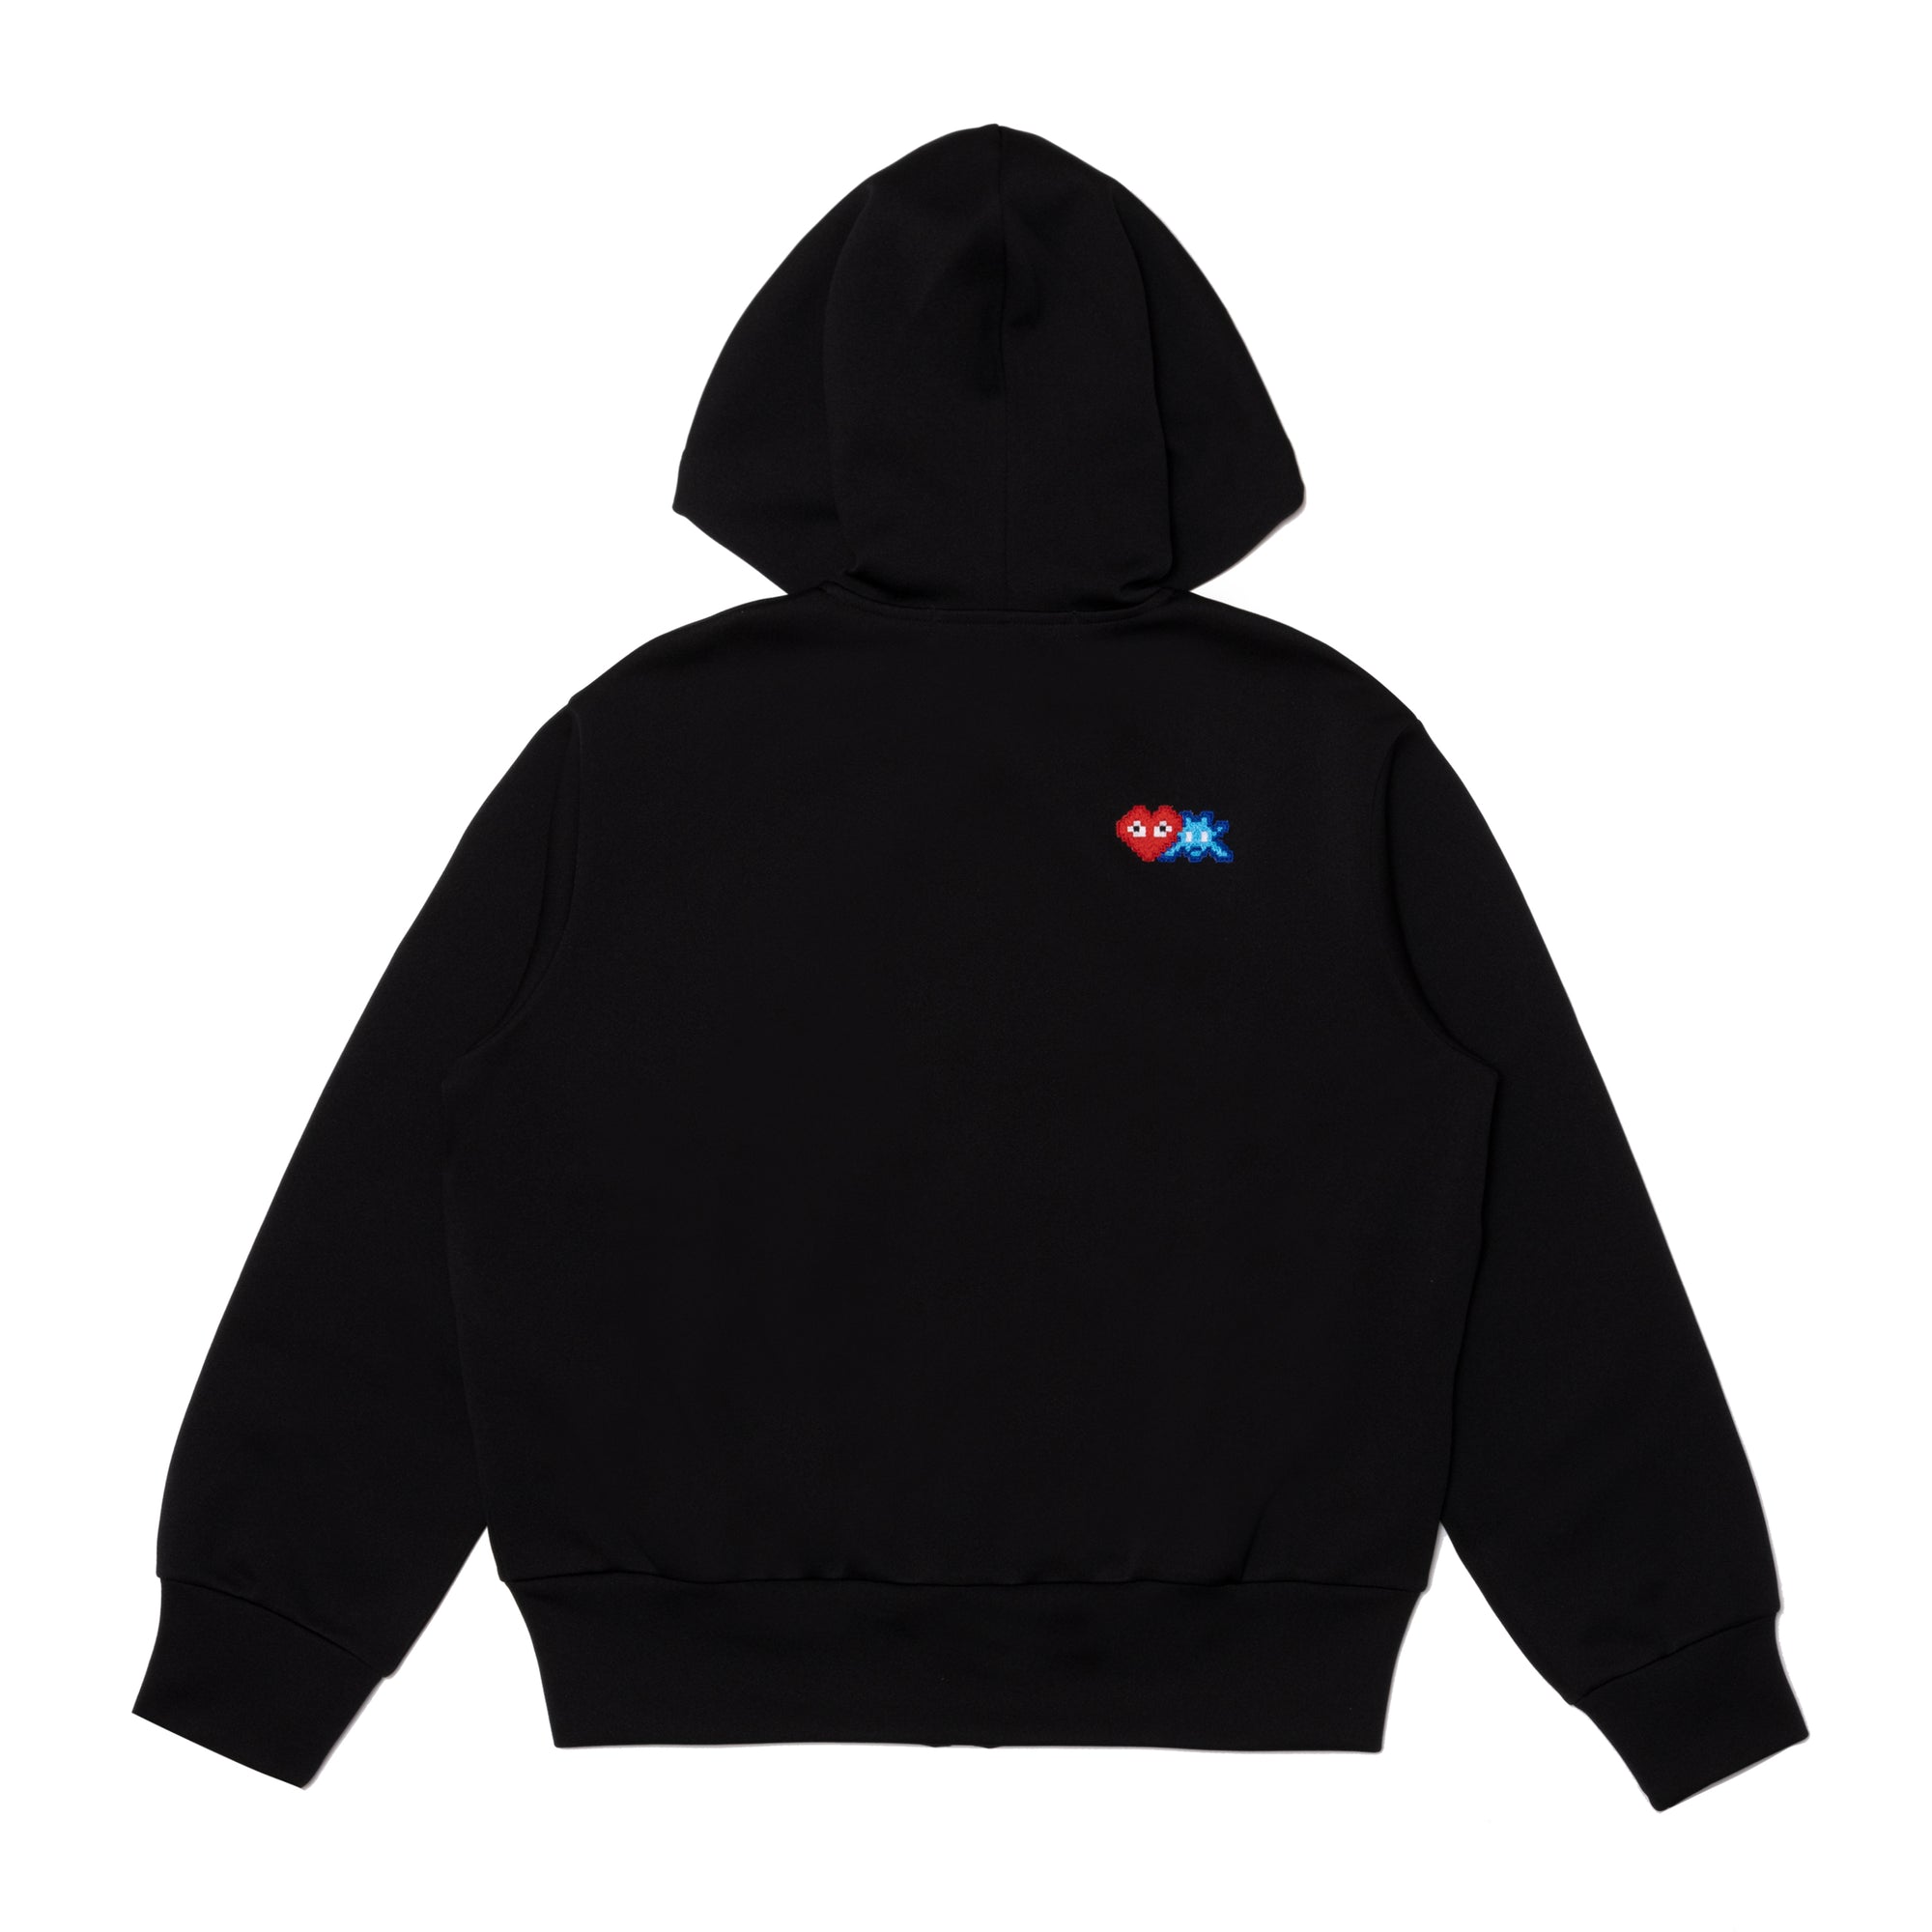 PLAY CDG - INVADER Polyester Hooded Sweater - (Black) view 1